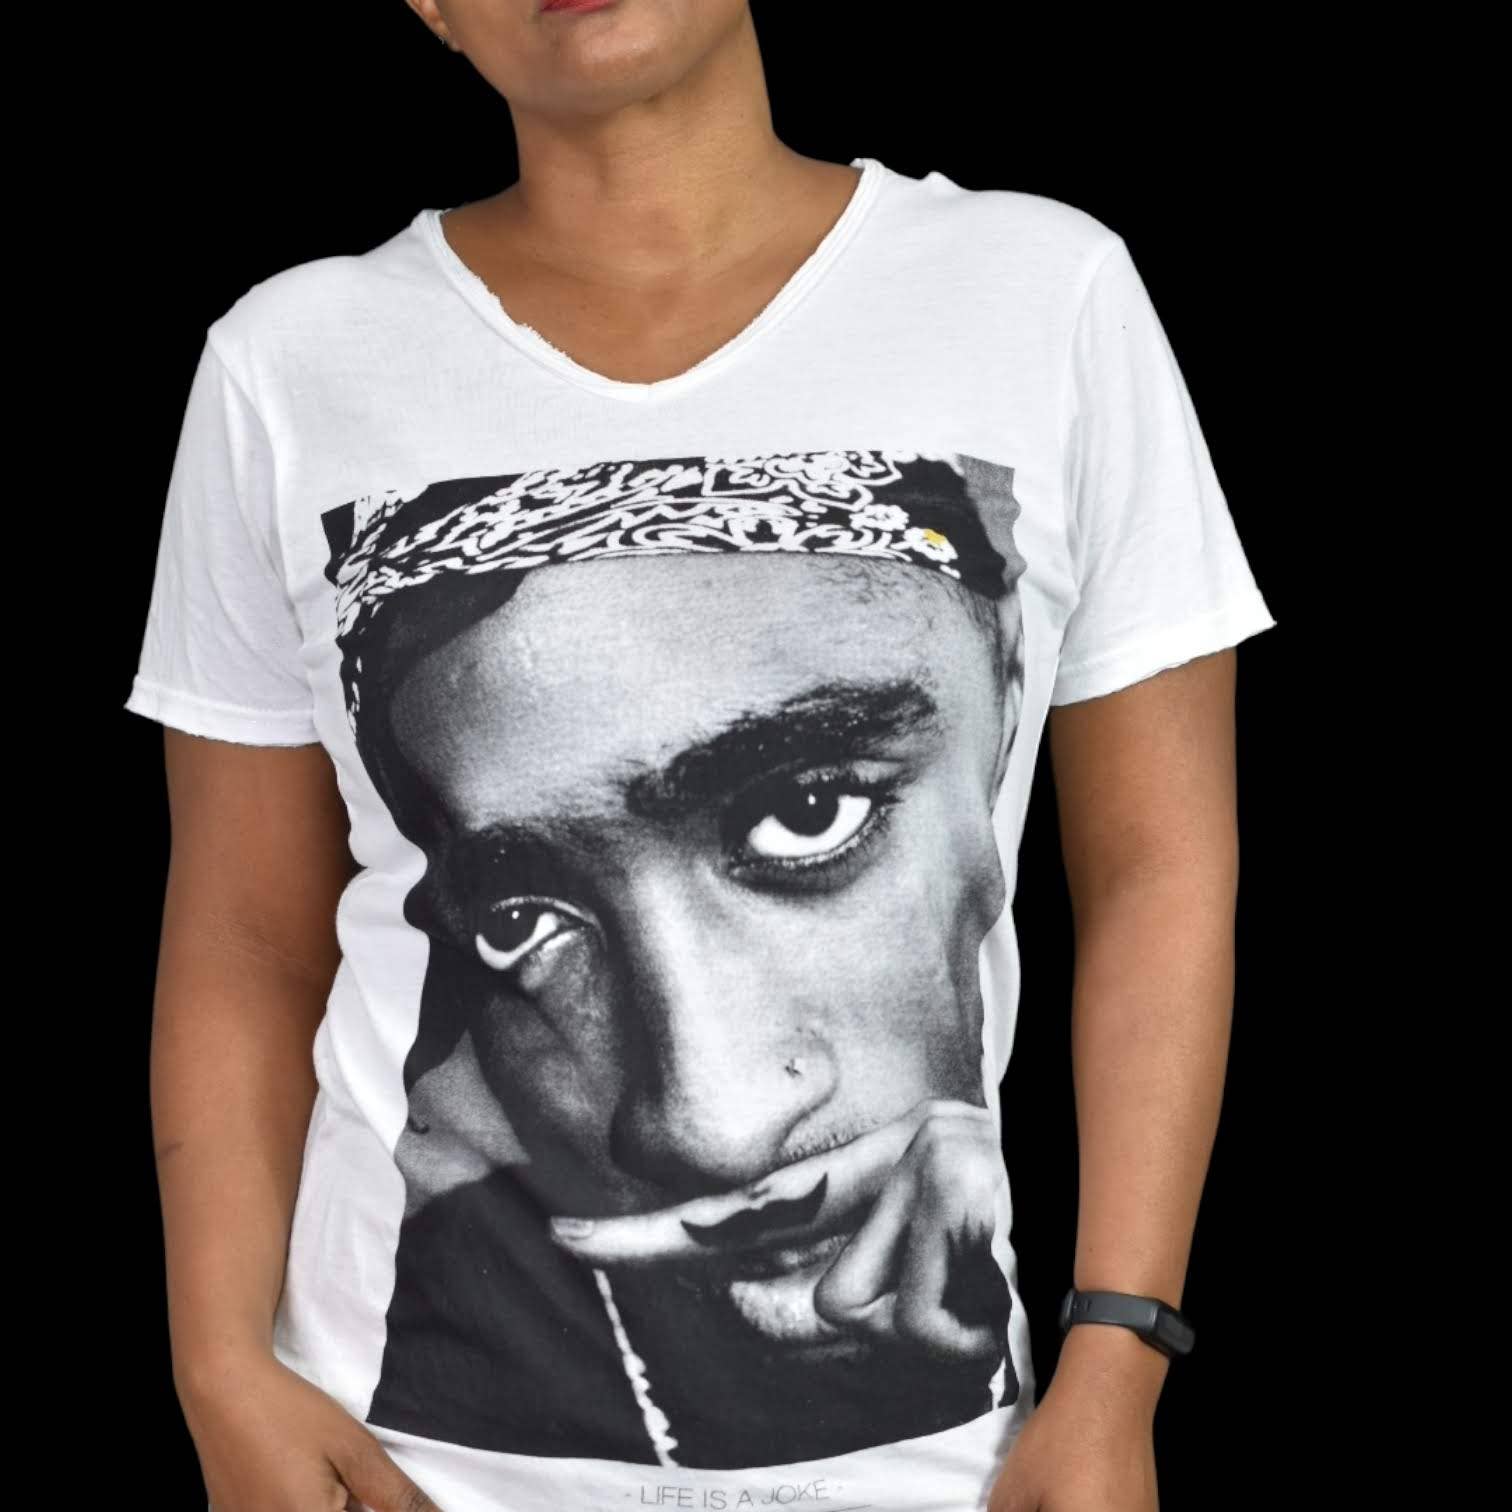 Eleven Paris Tupac Tee White and Black Life is A Joke Shirt V Neck Graphic Size Small